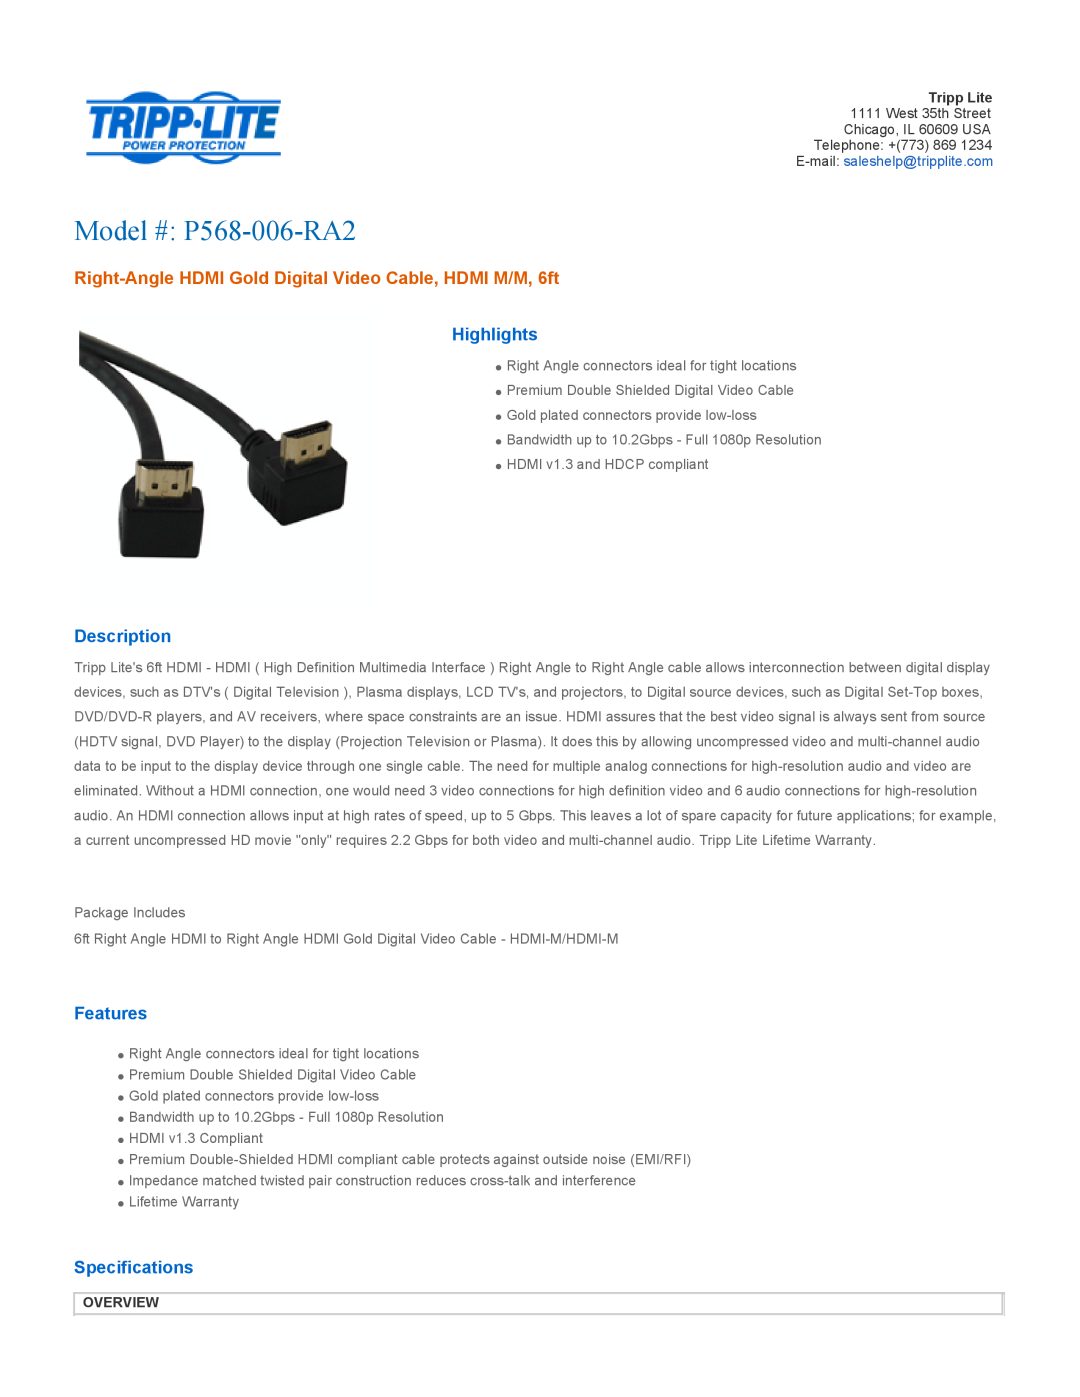 Tripp Lite specifications Overview, Model # P568-006-RA2, Right-Angle HDMI Gold Digital Video Cable, HDMI M/M, 6ft 